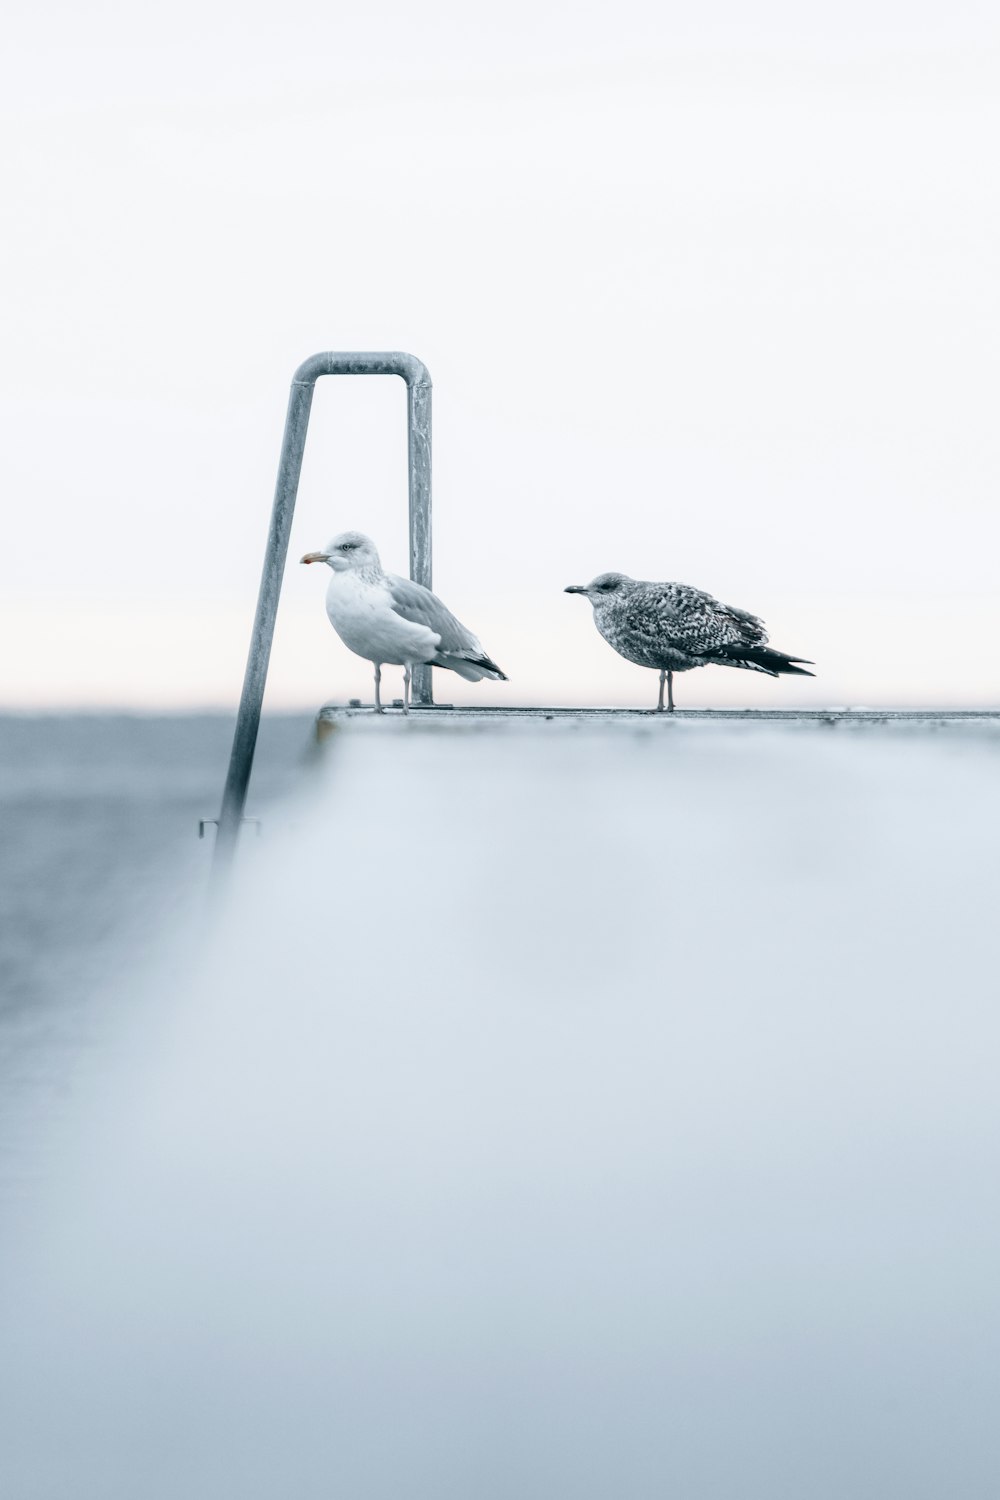 two seagulls are standing on a railing in the water